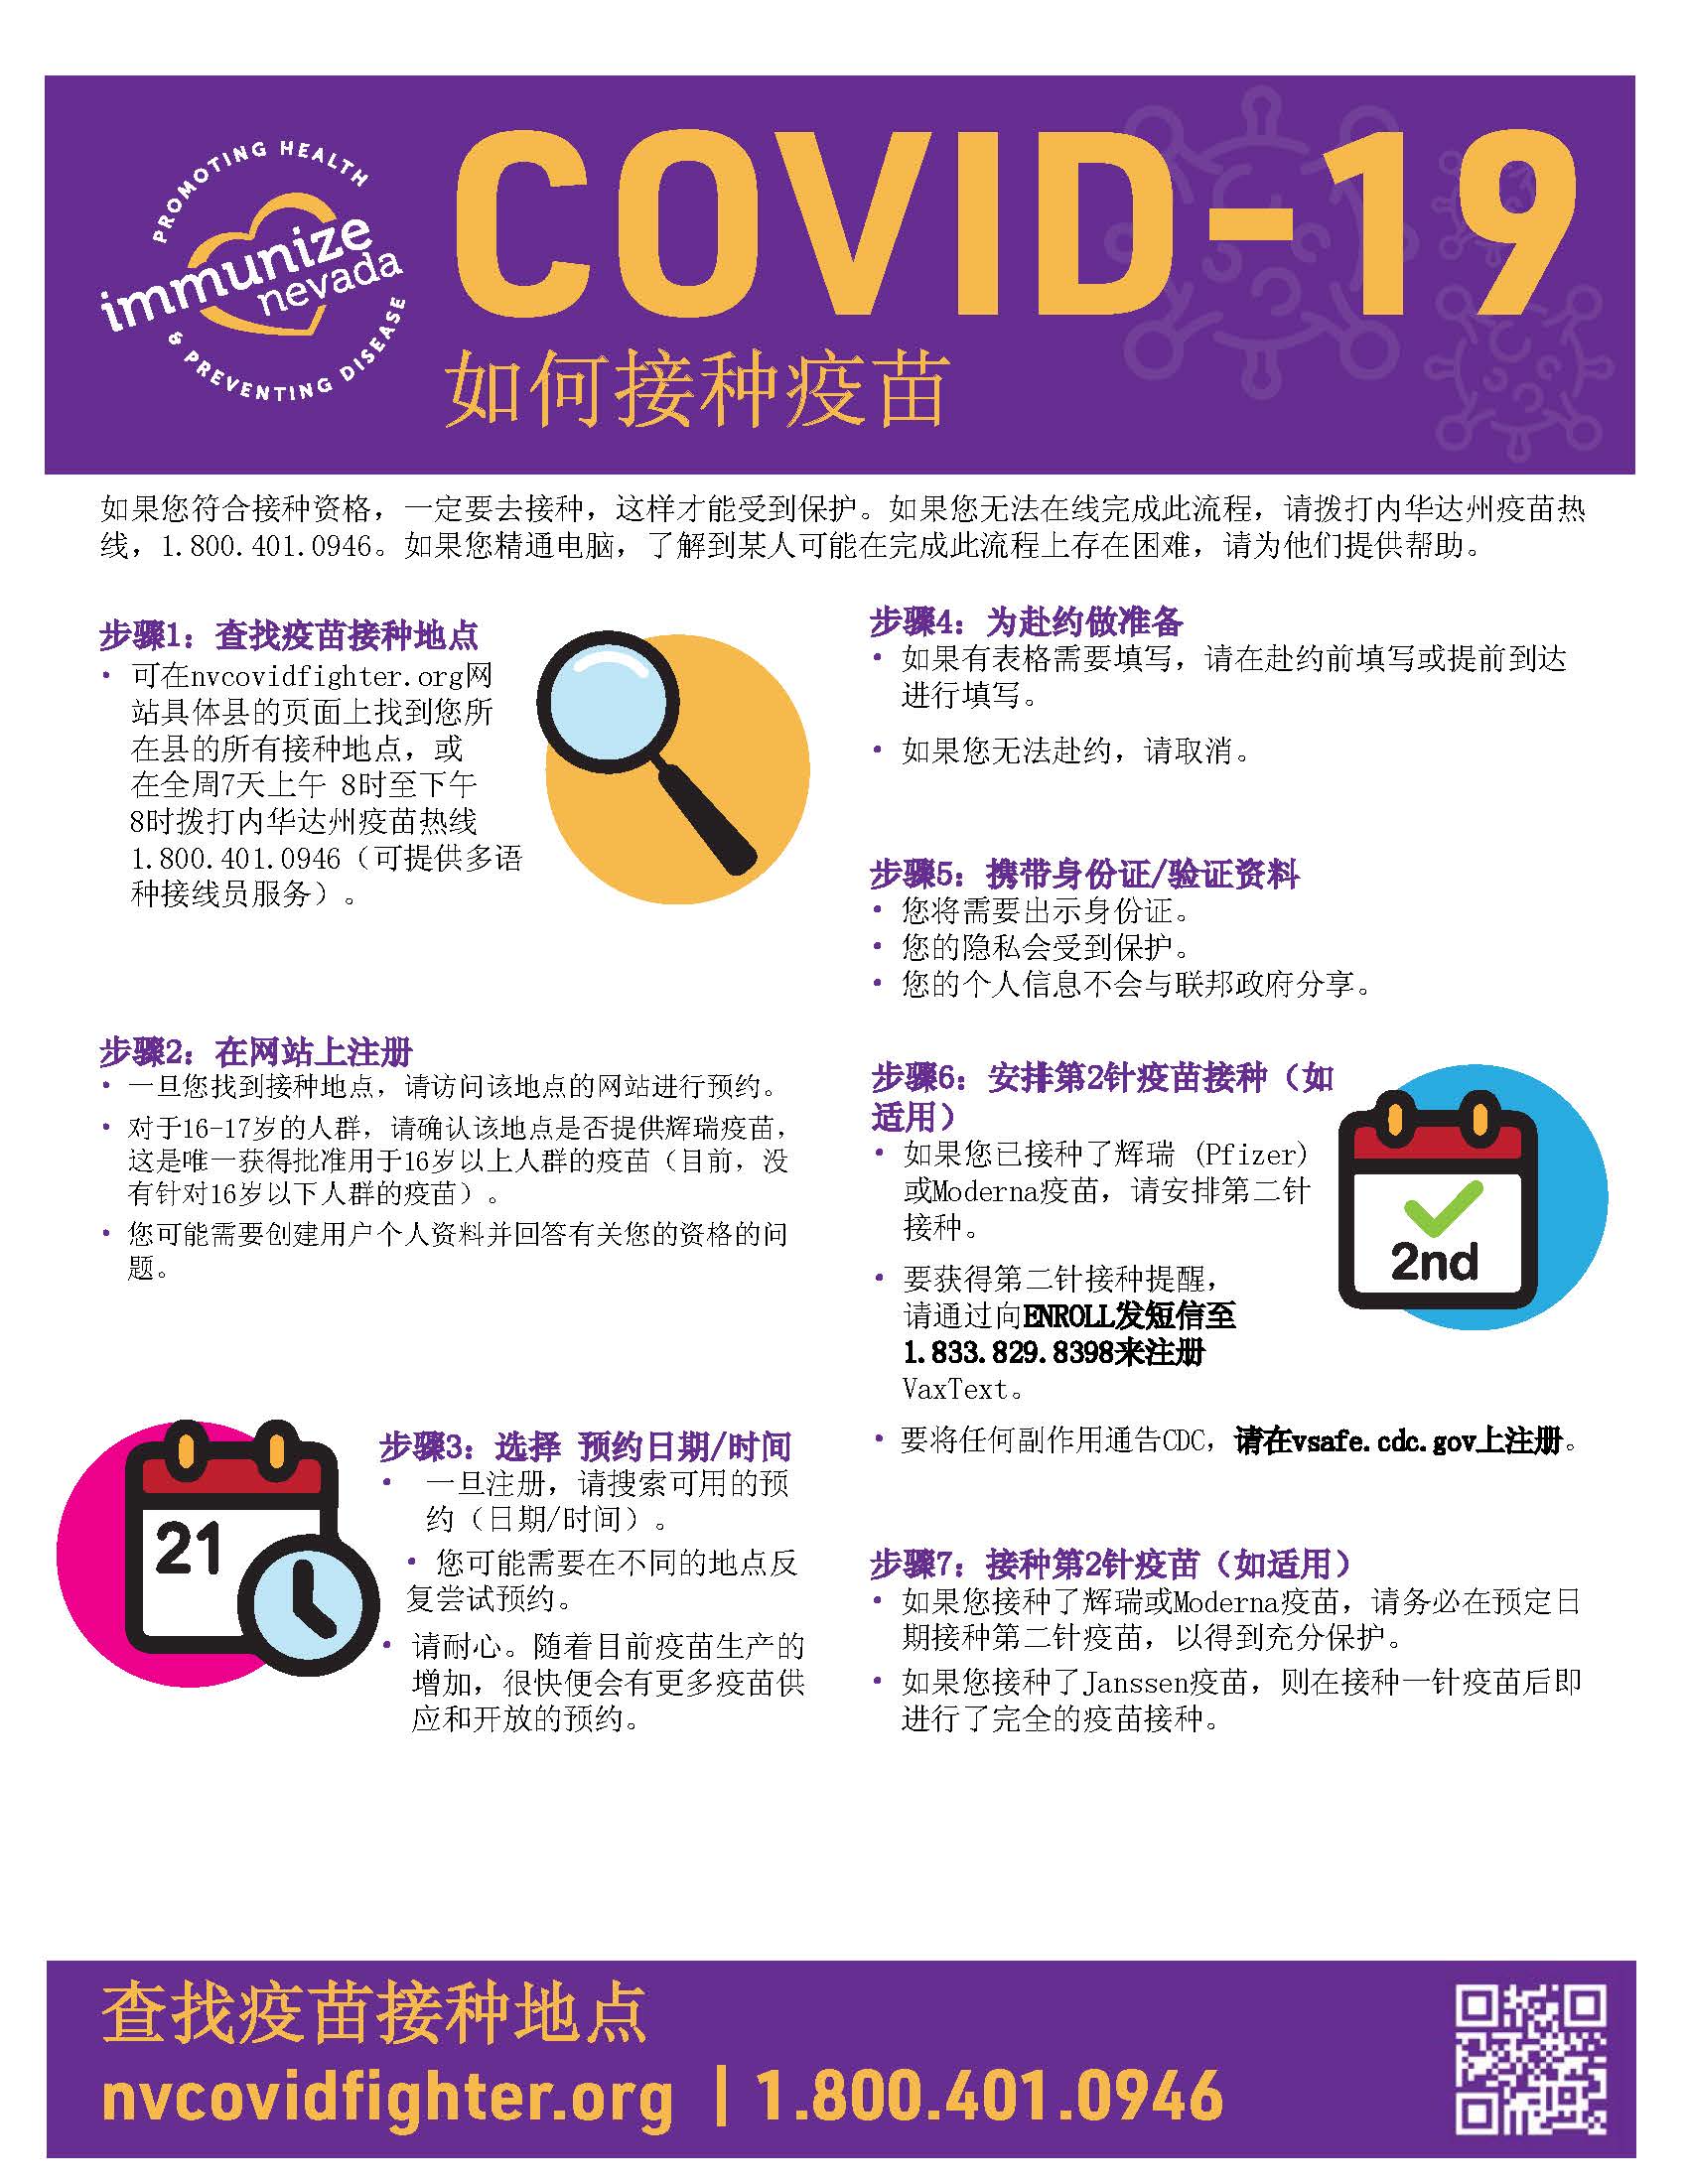 COVID-19 Vaccine Appointment Steps Flyer Chinese_v1